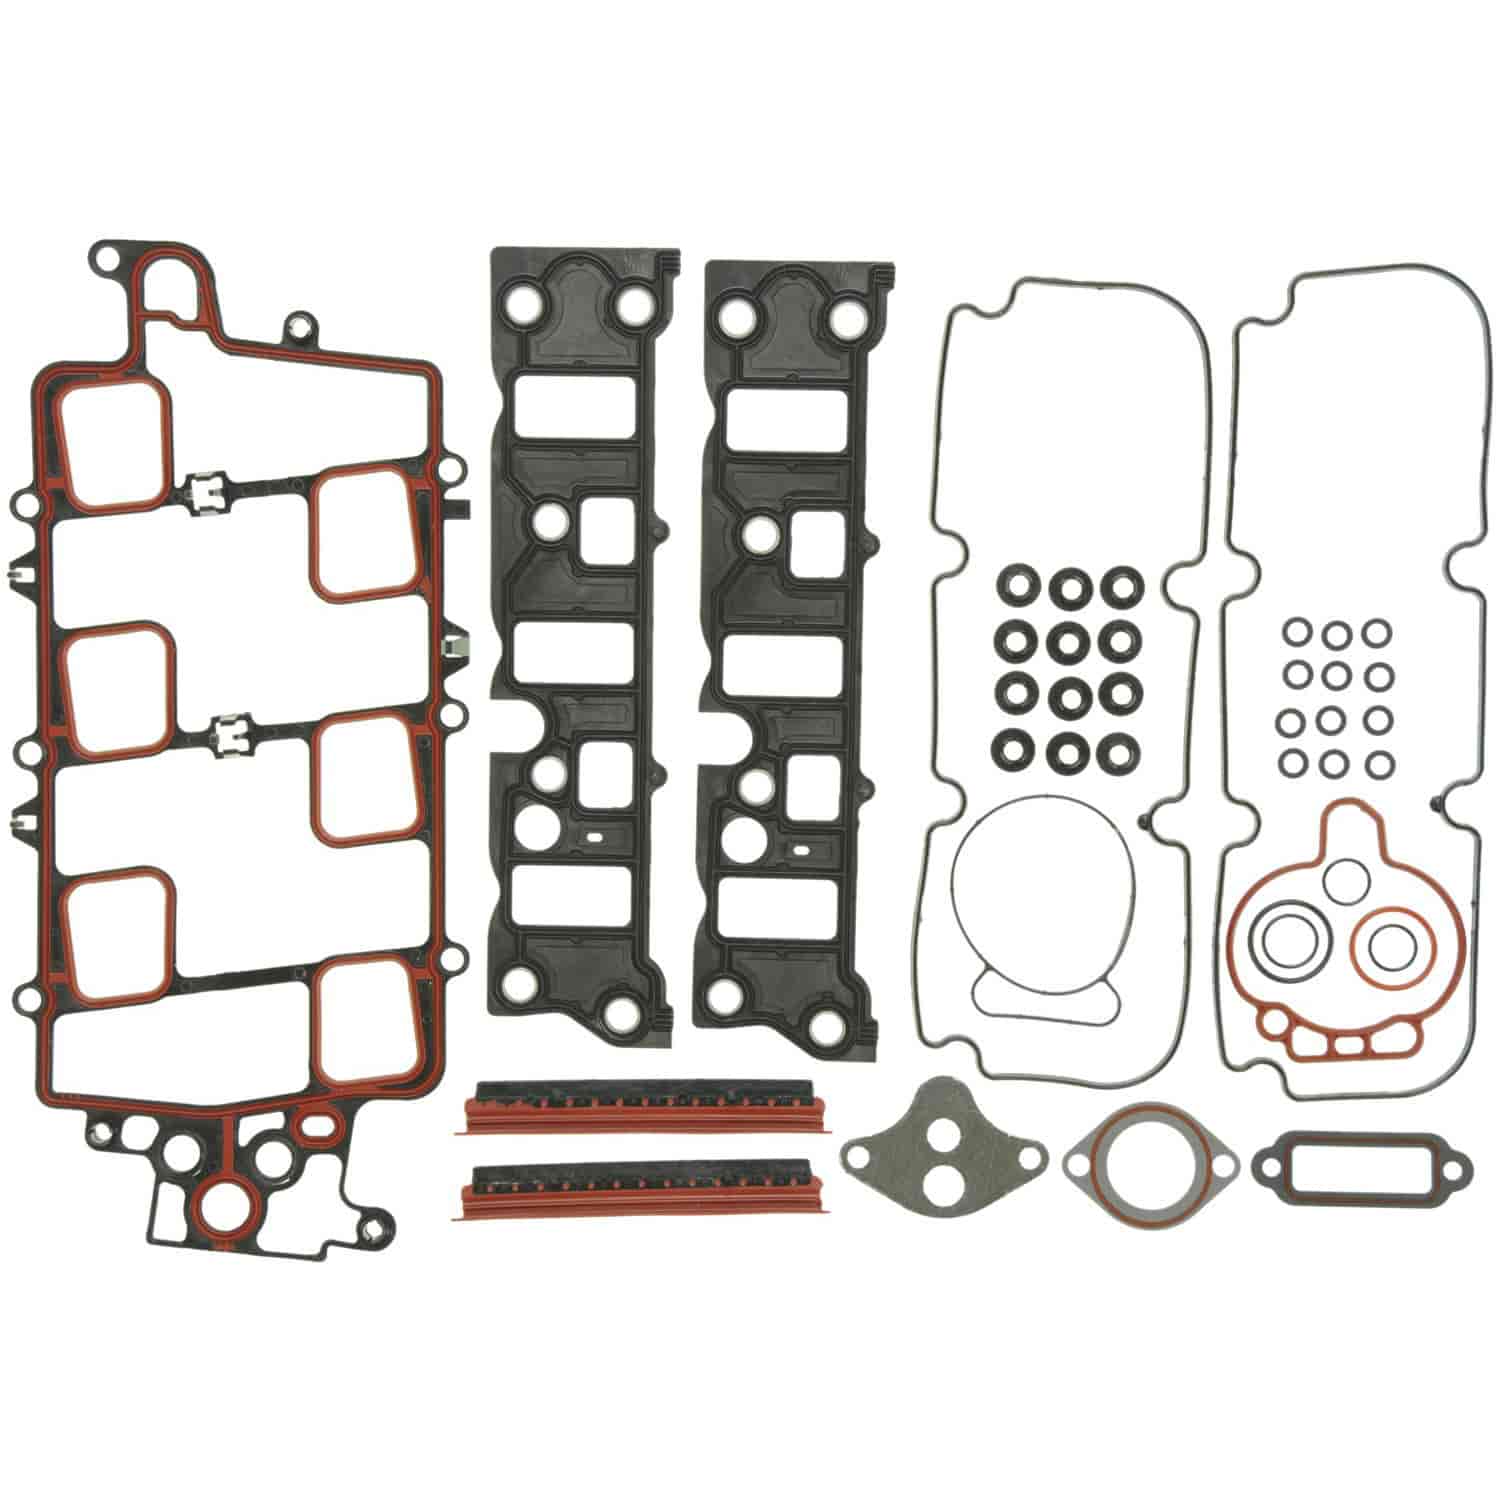 Intake Manifold Installation Kit 1997-2009 Buick/Chevy/Olds/Pontiac with V6 3.8L Series II/III